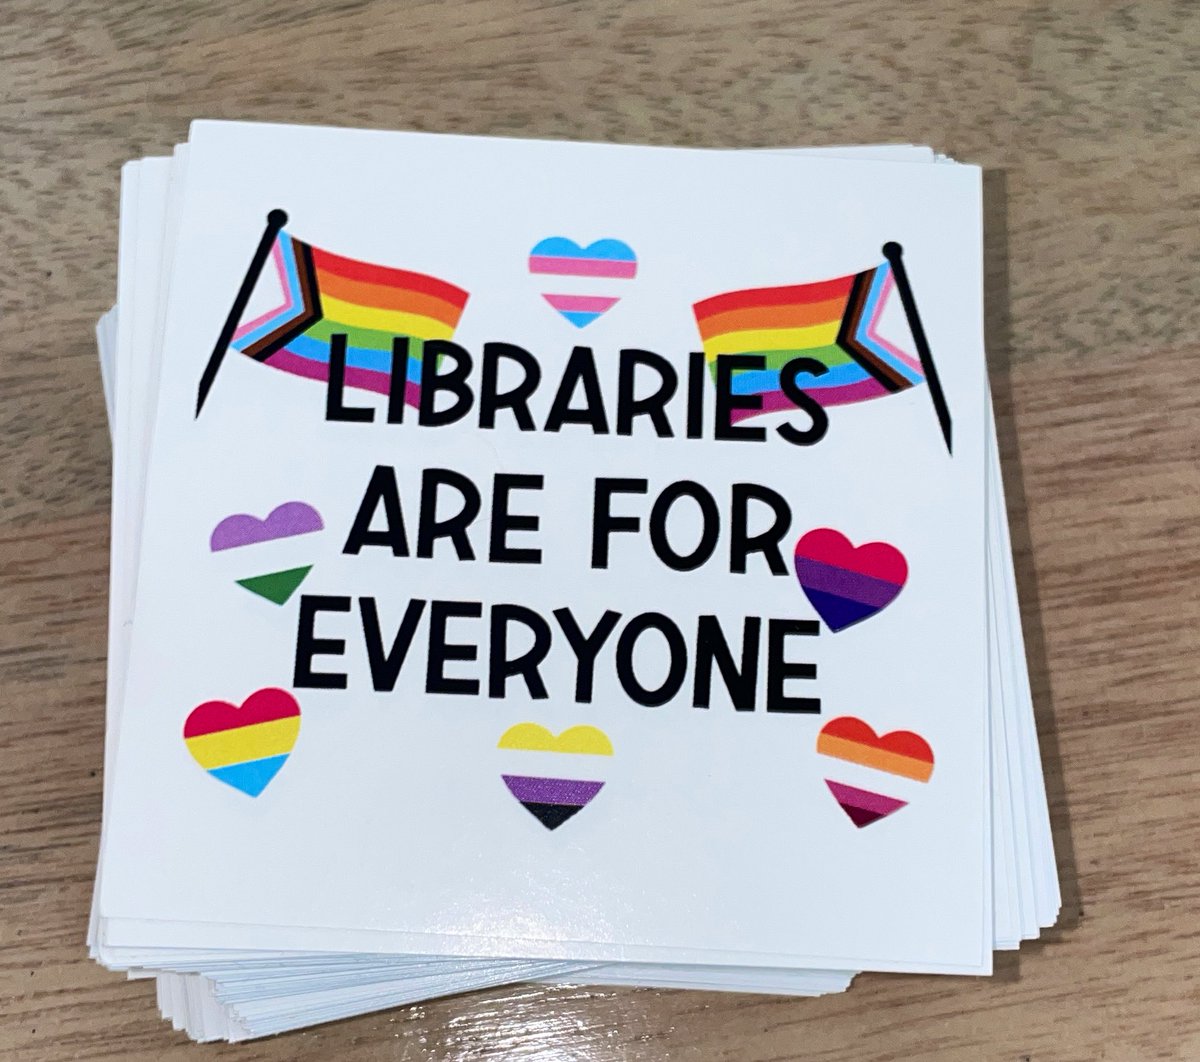 So happy to be back in my home city of Chicago for  #ALAAC23! This is my first conference and I’m so excited for the opportunity to meet so many amazing librarians and authors💕 I brought a LOT of stickers to hand out too🏳️‍🌈🏳️‍⚧️ happy pride!